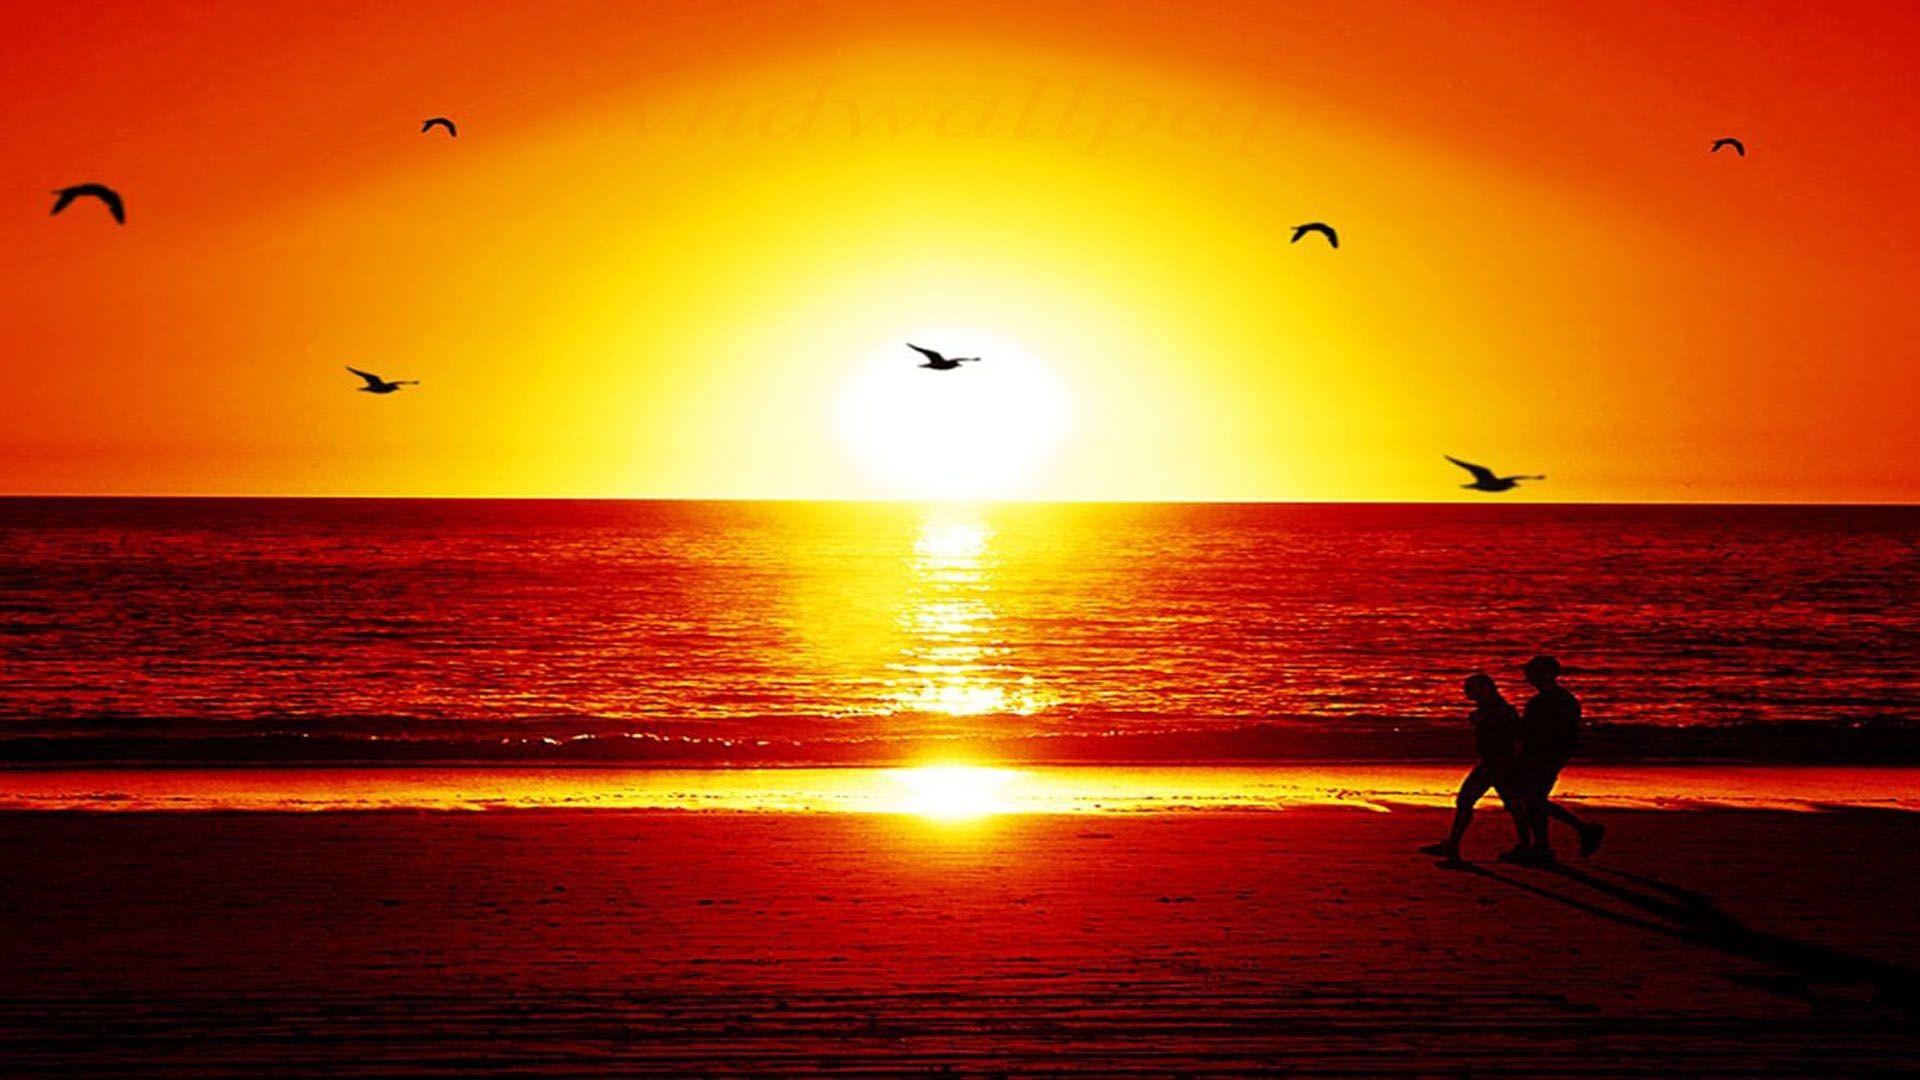 1920x1080 wallpaper details file name sunset wallpaper hd widescreen uploaded by .